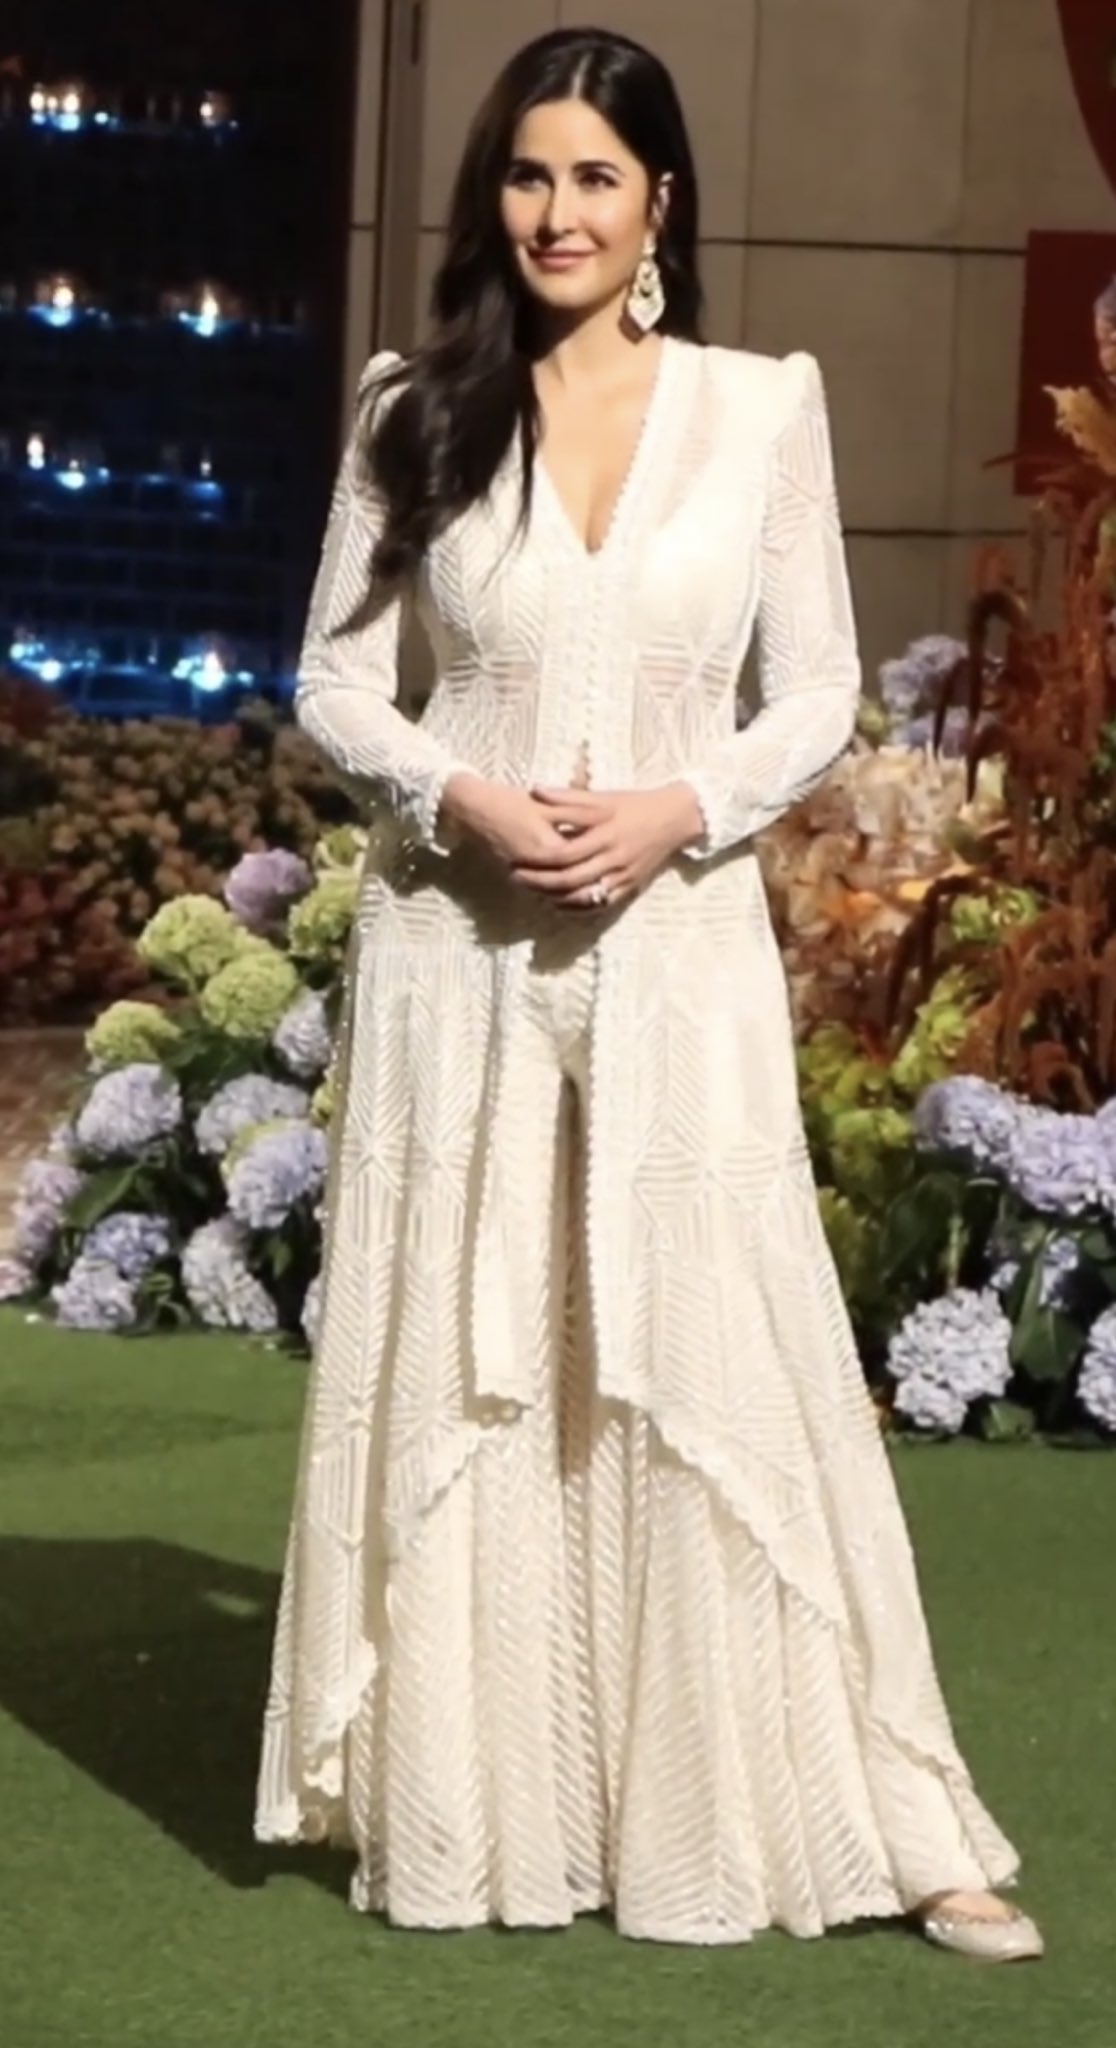 Actor Katrina Kaif looked extremely beautiful in a White indo-western outfit.